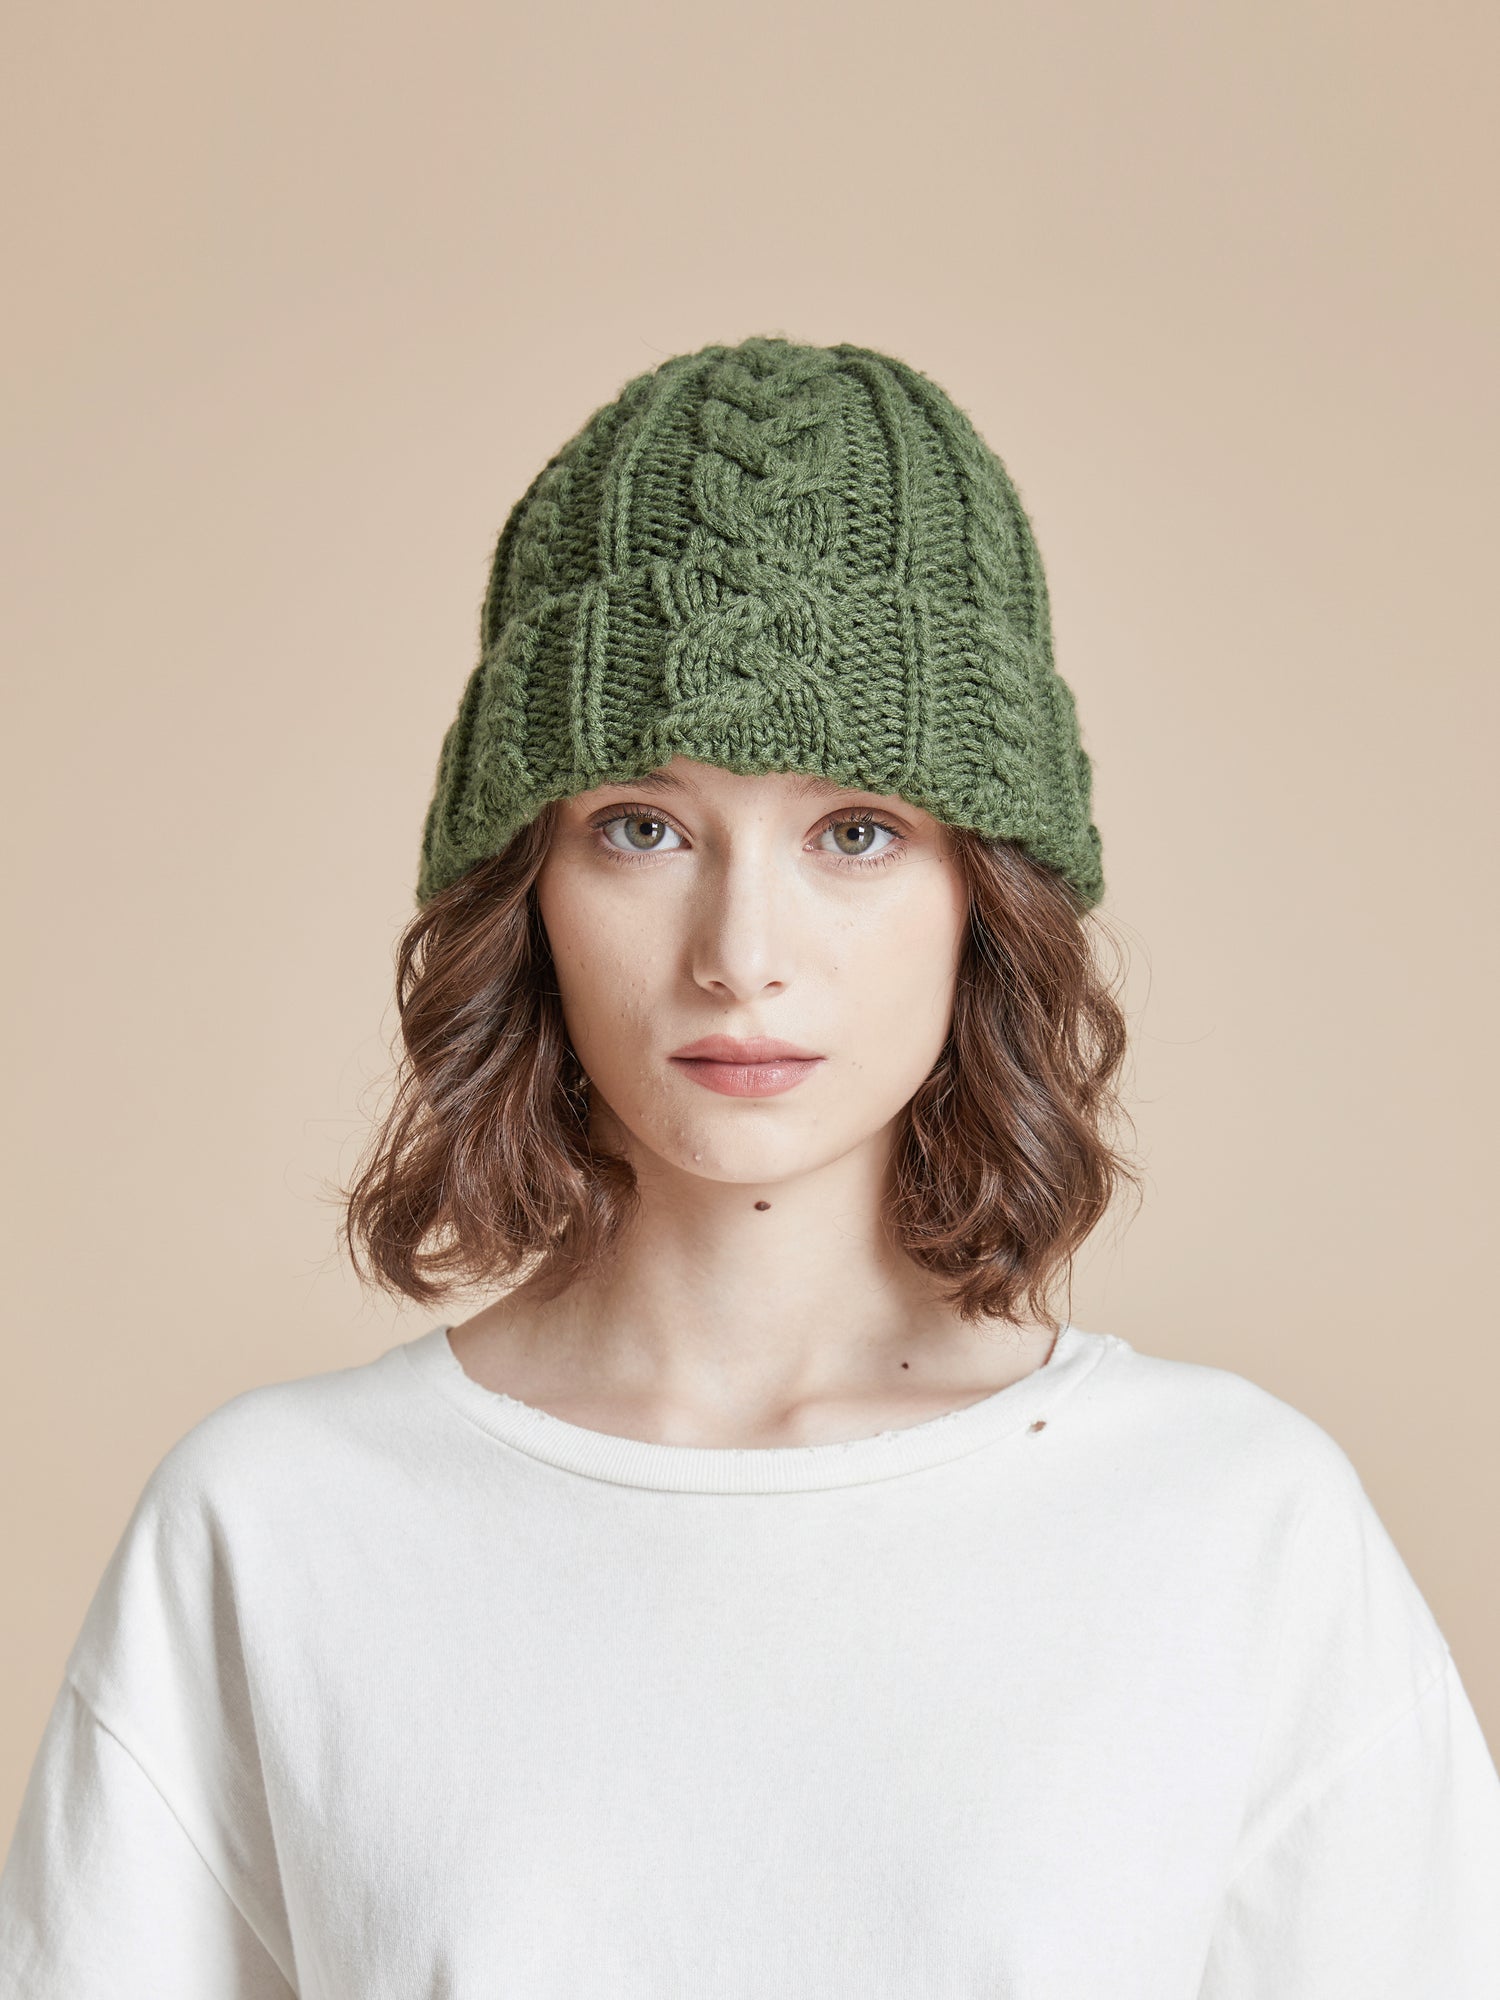 A woman wearing a Profound Forest Cable Knit Beanie hat.